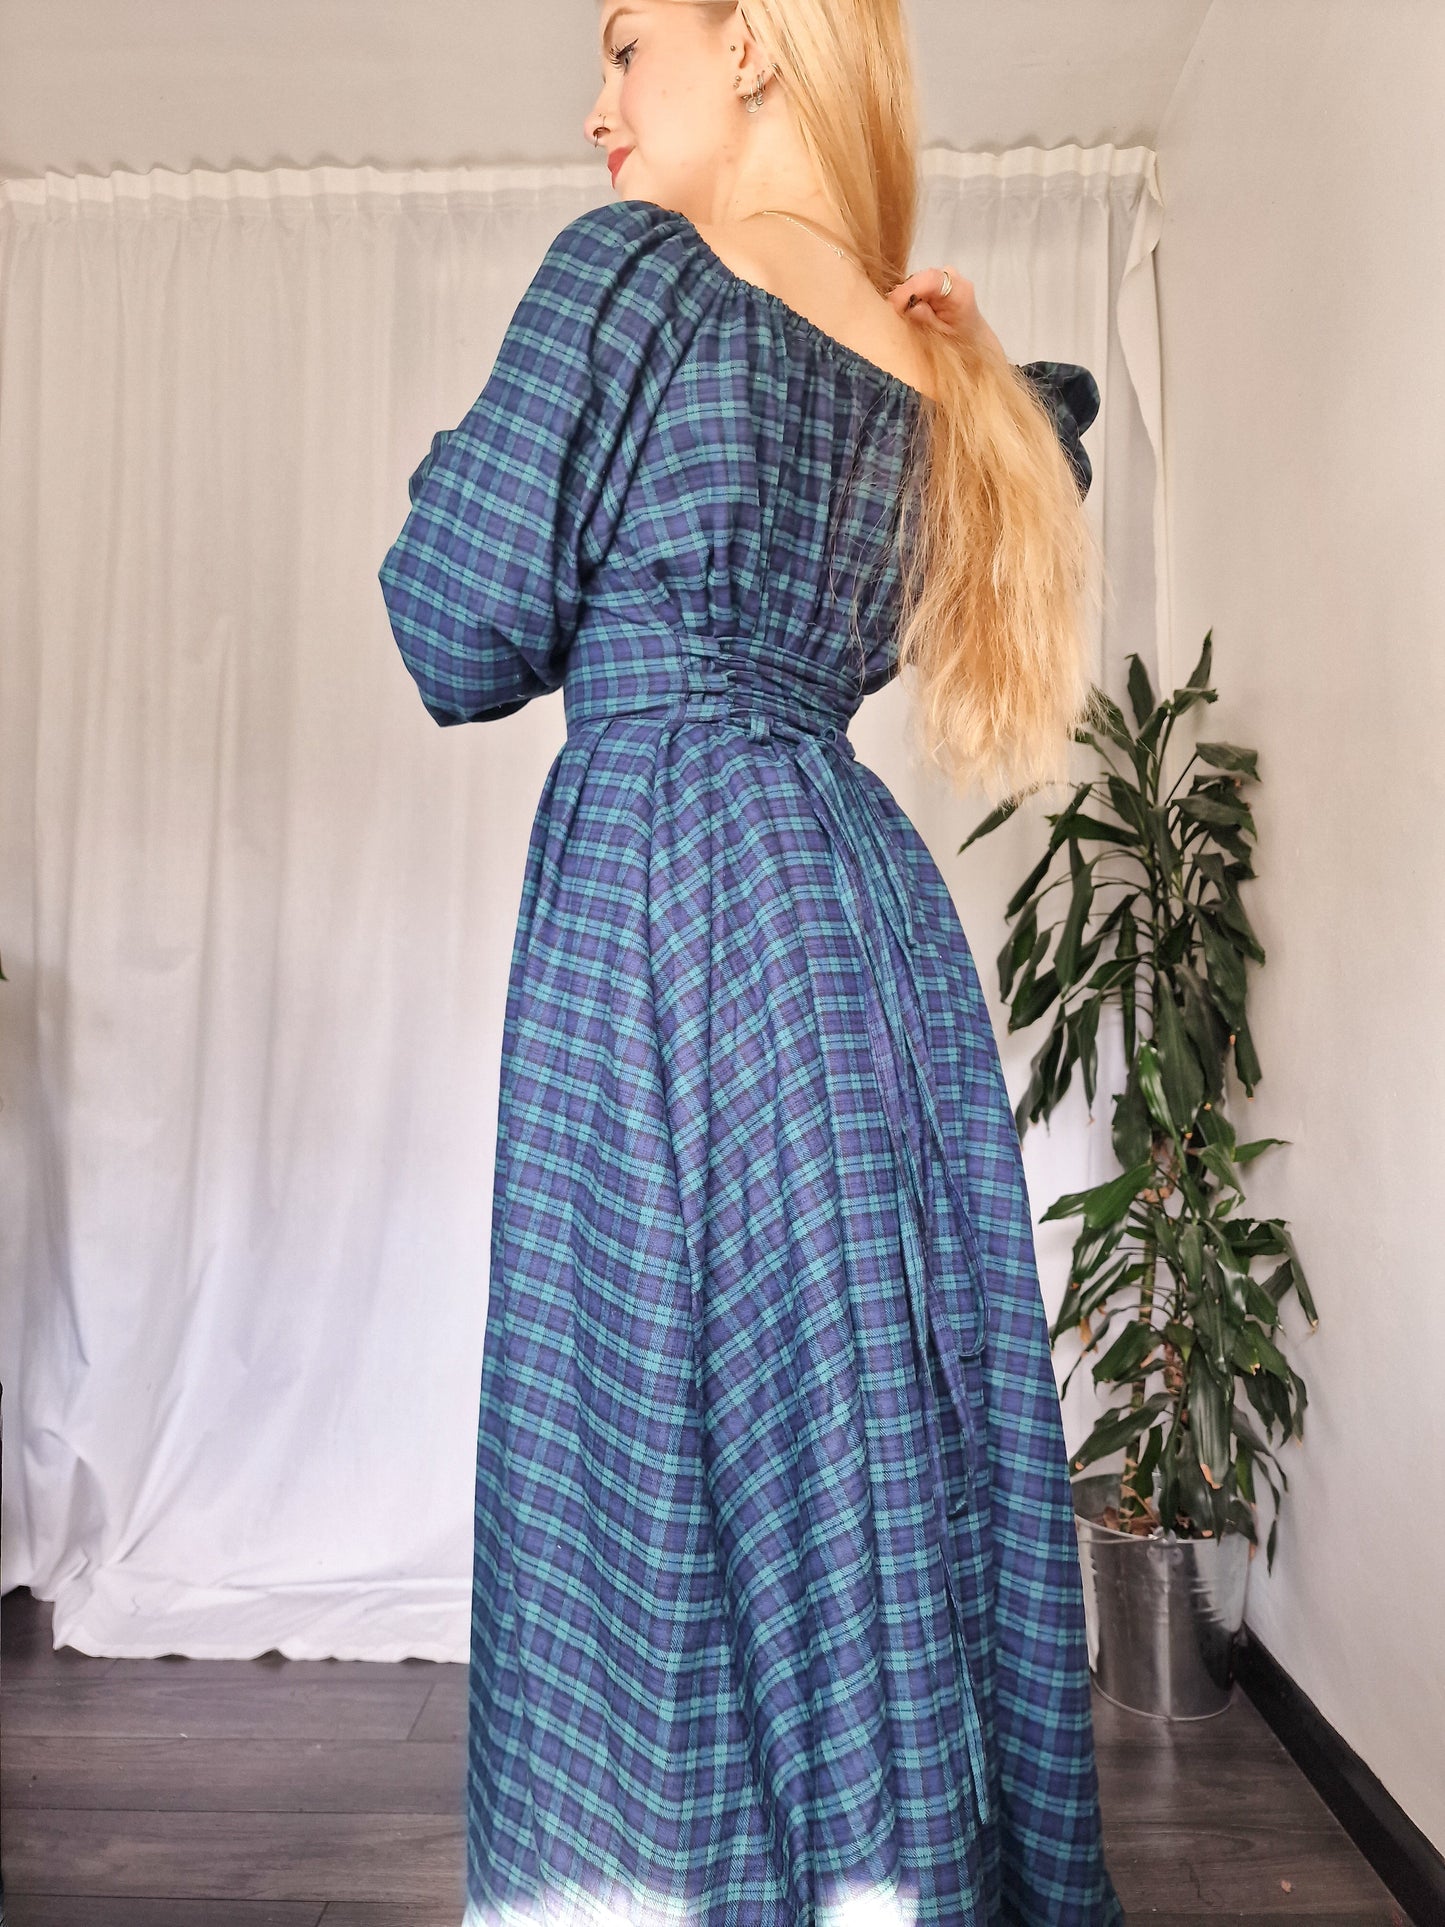 Harvest Dress (Other fabrics available)